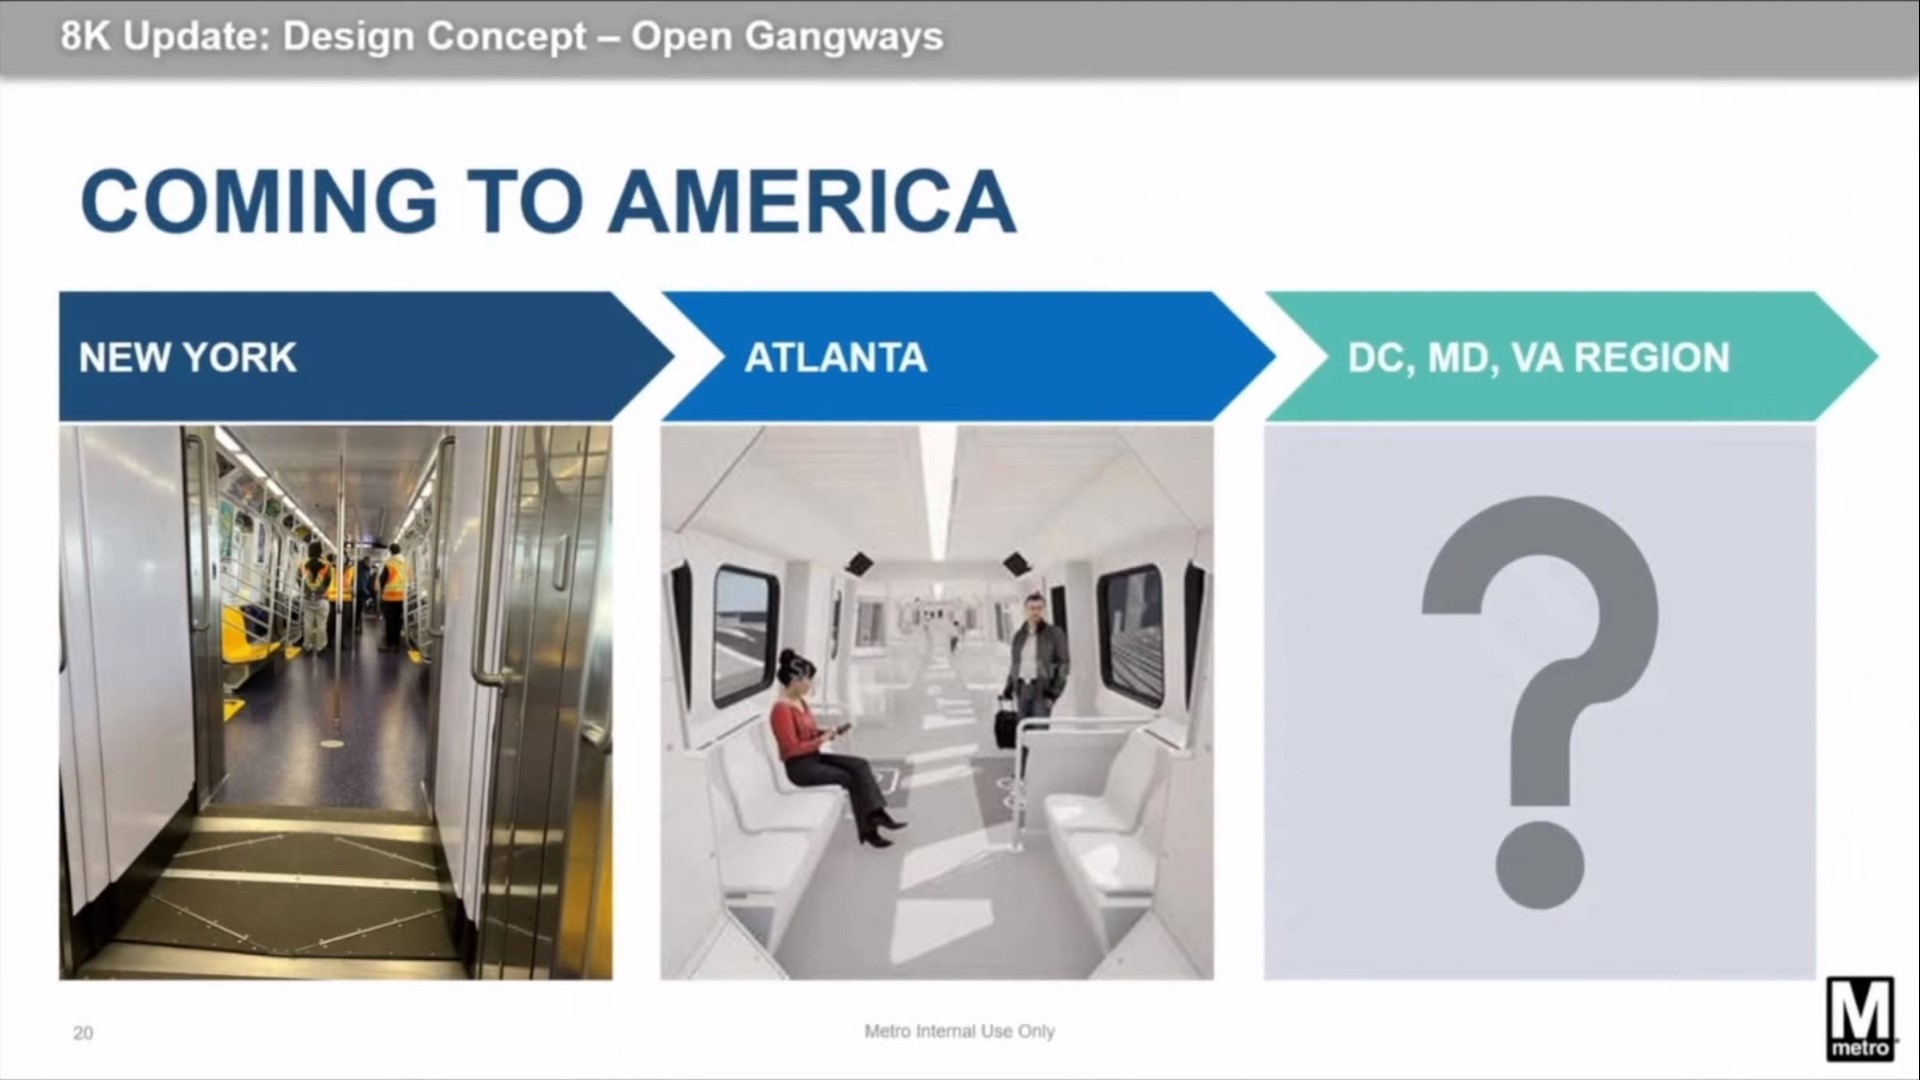 Metro CEO Randy Clarke announced in a meeting today that 'open gangways' could be coming to metro trains in the DMV.